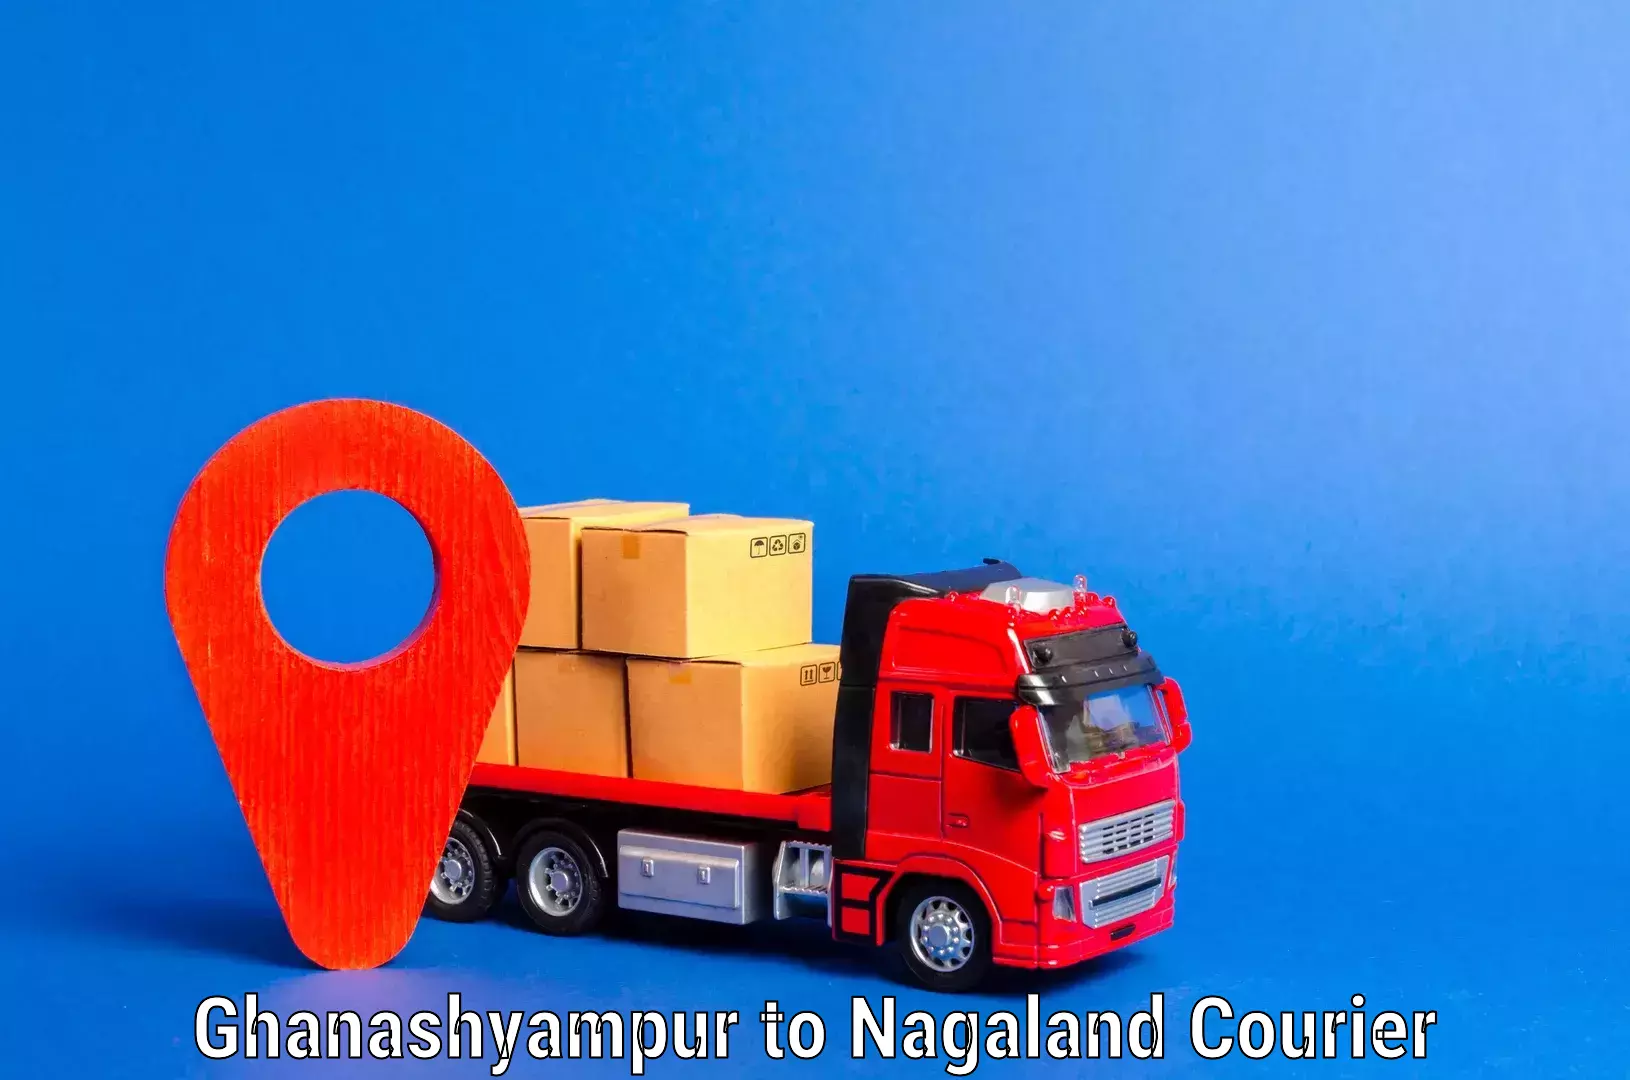 Furniture transport experts in Ghanashyampur to Nagaland